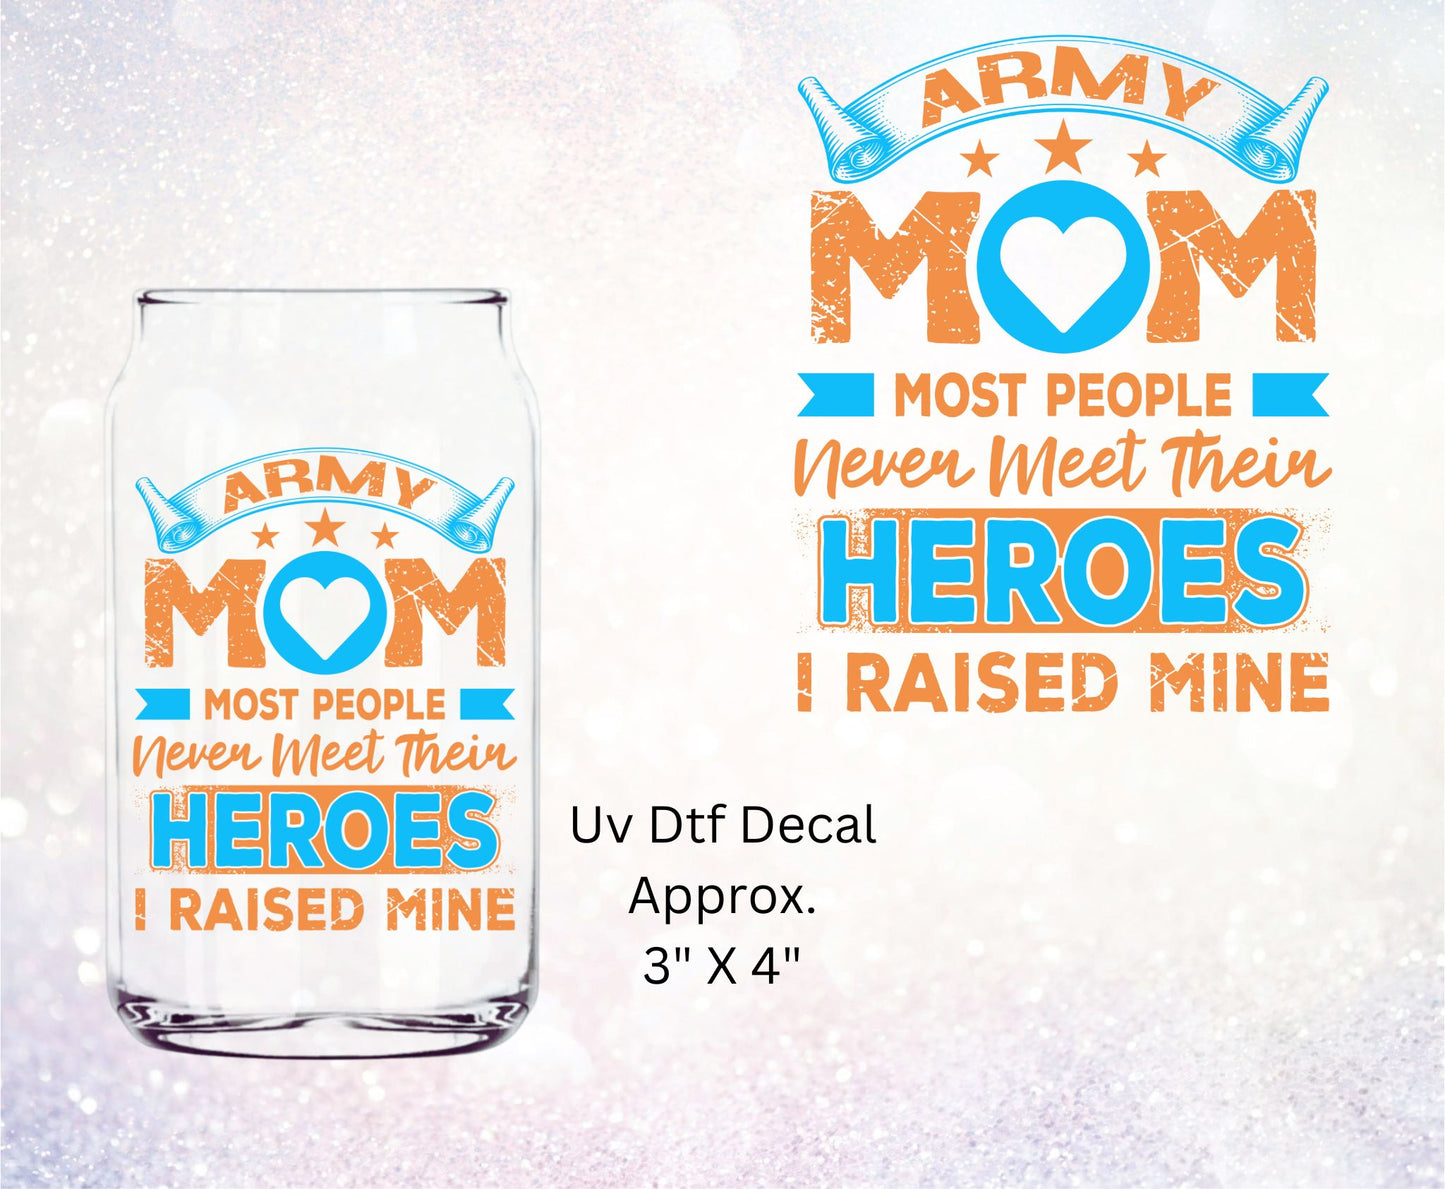 Uv Dtf Decal Army Mom Most People Never Meet Their Heroes